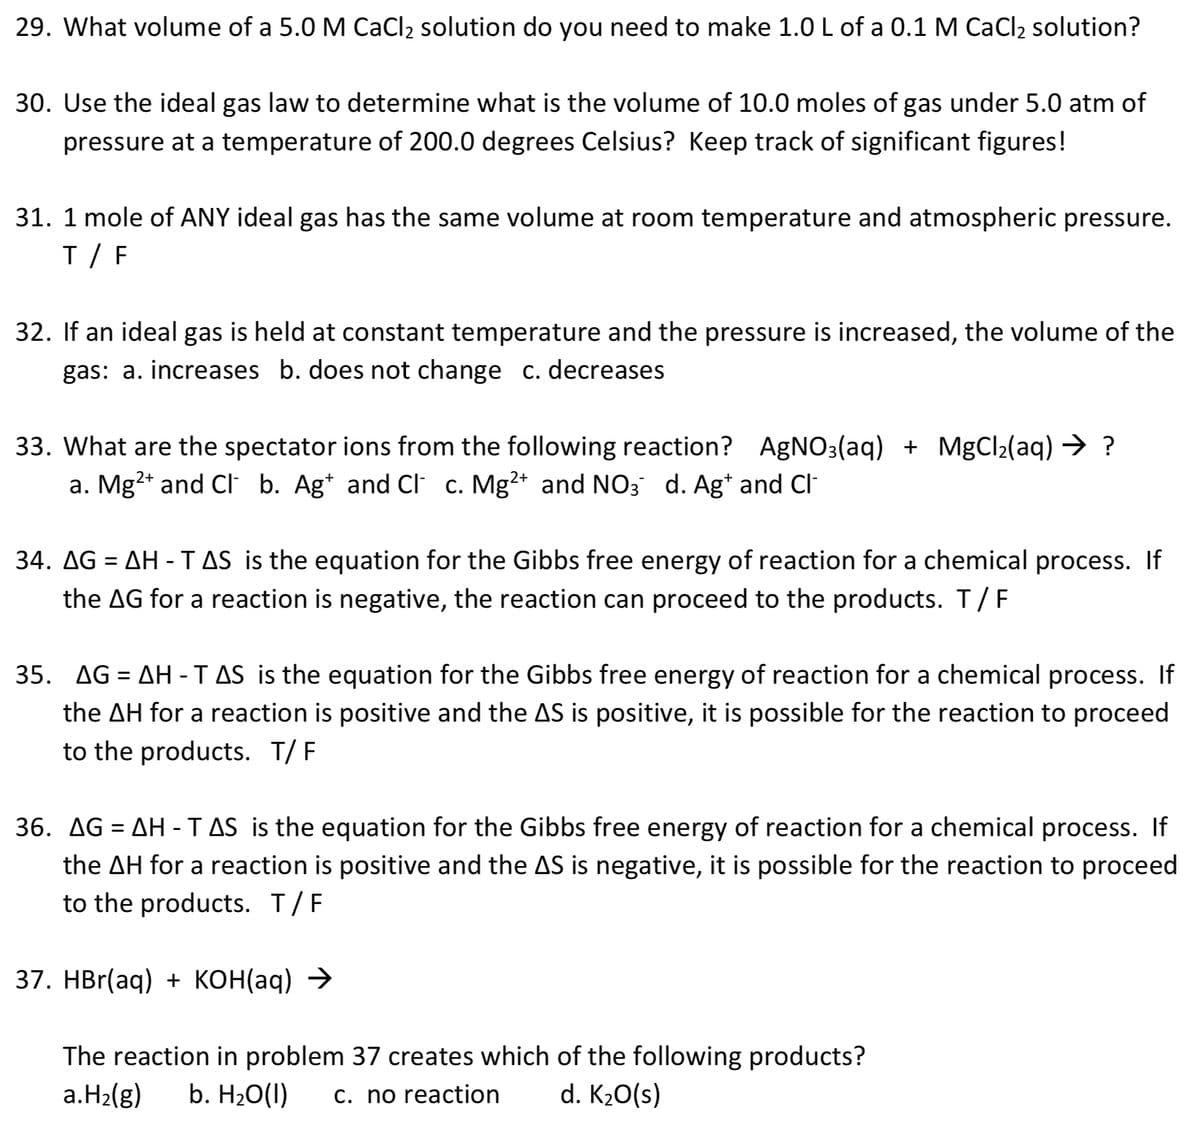 29. What volume of a 5.0 M CaCl2 solution do you need to make 1.0 L of a 0.1 M CaCl2 solution?
30. Use the ideal gas law to determine what is the volume of 10.0 moles of gas under 5.0 atm of
pressure at a temperature of 200.0 degrees Celsius? Keep track of significant figures!
31. 1 mole of ANY ideal gas has the same volume at room temperature and atmospheric pressure.
T / F
32. If an ideal gas is held at constant temperature and the pressure is increased, the volume of the
gas: a. increases b. does not change c. decreases
33. What are the spectator ions from the following reaction? AgNO3(aq) + MgCl2(aq) → ?
a. Mg2+ and CI b. Ag* and Cl c. Mg²+ and NO3 d. Ag* and Cl
34. AG = AH -TAS is the equation for the Gibbs free energy of reaction for a chemical process. If
the AG for a reaction is negative, the reaction can proceed to the products. T/F
35. AG = AH -TAS is the equation for the Gibbs free energy of reaction for a chemical process. If
the AH for a reaction is positive and the AS is positive, it is possible for the reaction to proceed
to the products. T/ F
36. AG = AH -TAS is the equation for the Gibbs free energy of reaction for a chemical process. If
the AH for a reaction is positive and the AS is negative, it is possible for the reaction to proceed
to the products. T/F
37. НBr(aq) + коНag) >
The reaction in problem 37 creates which of the following products?
a.H2(g)
b. H20(1)
c. no reaction
d. K20(s)
